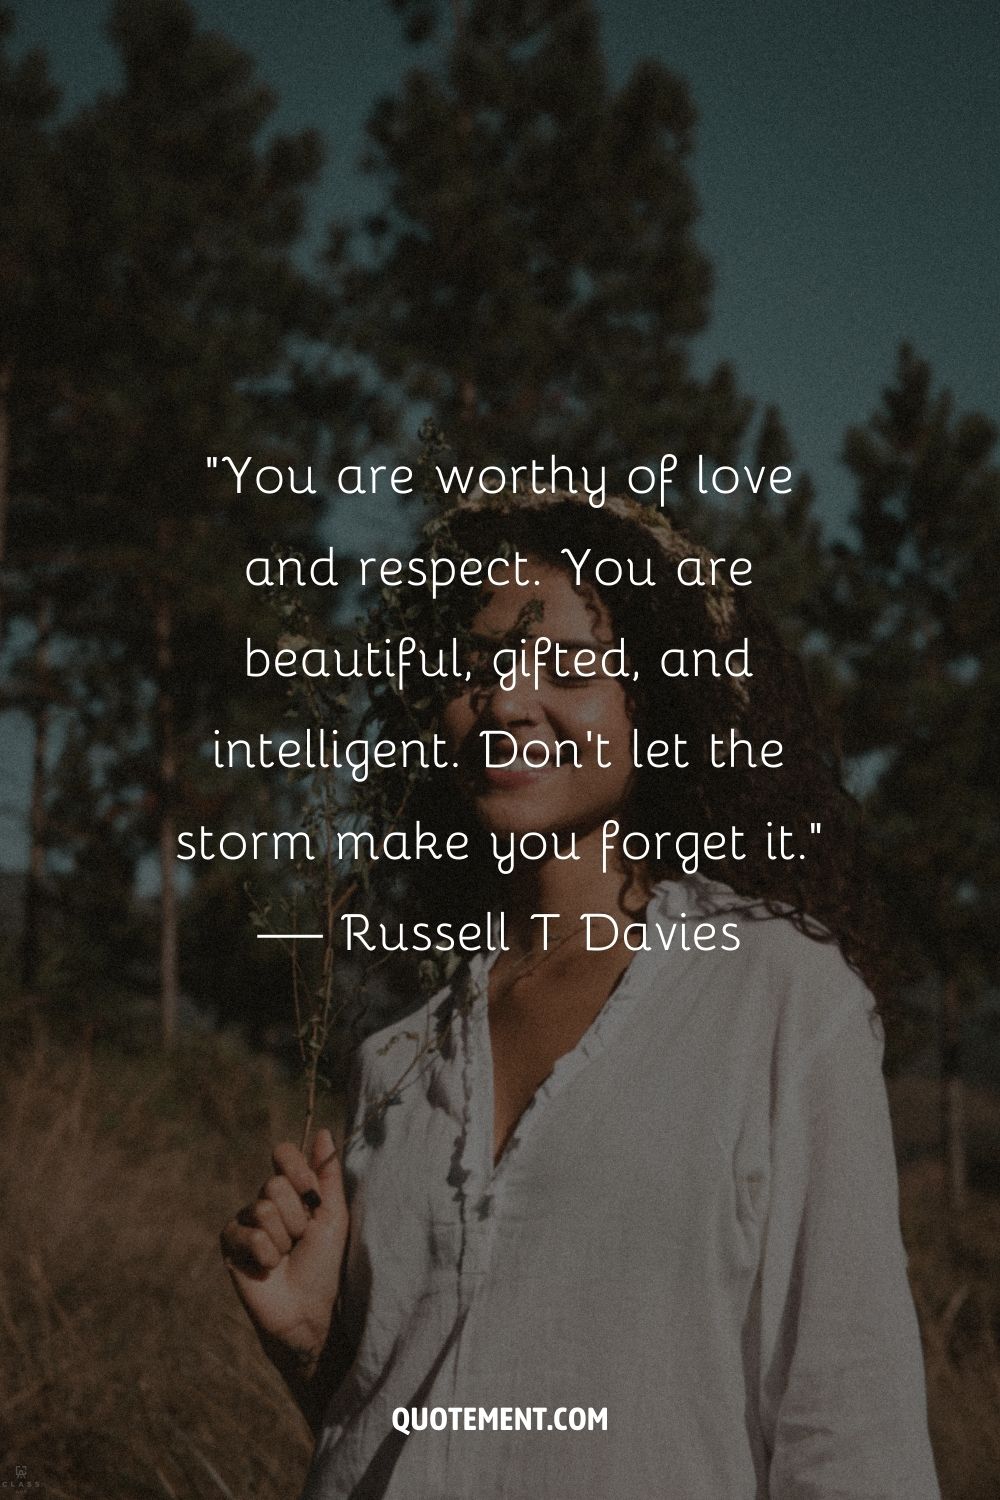 You are worthy of love and respect. You are beautiful, gifted, and intelligent. Don’t let the storm make you forget it. — Russell T Davies